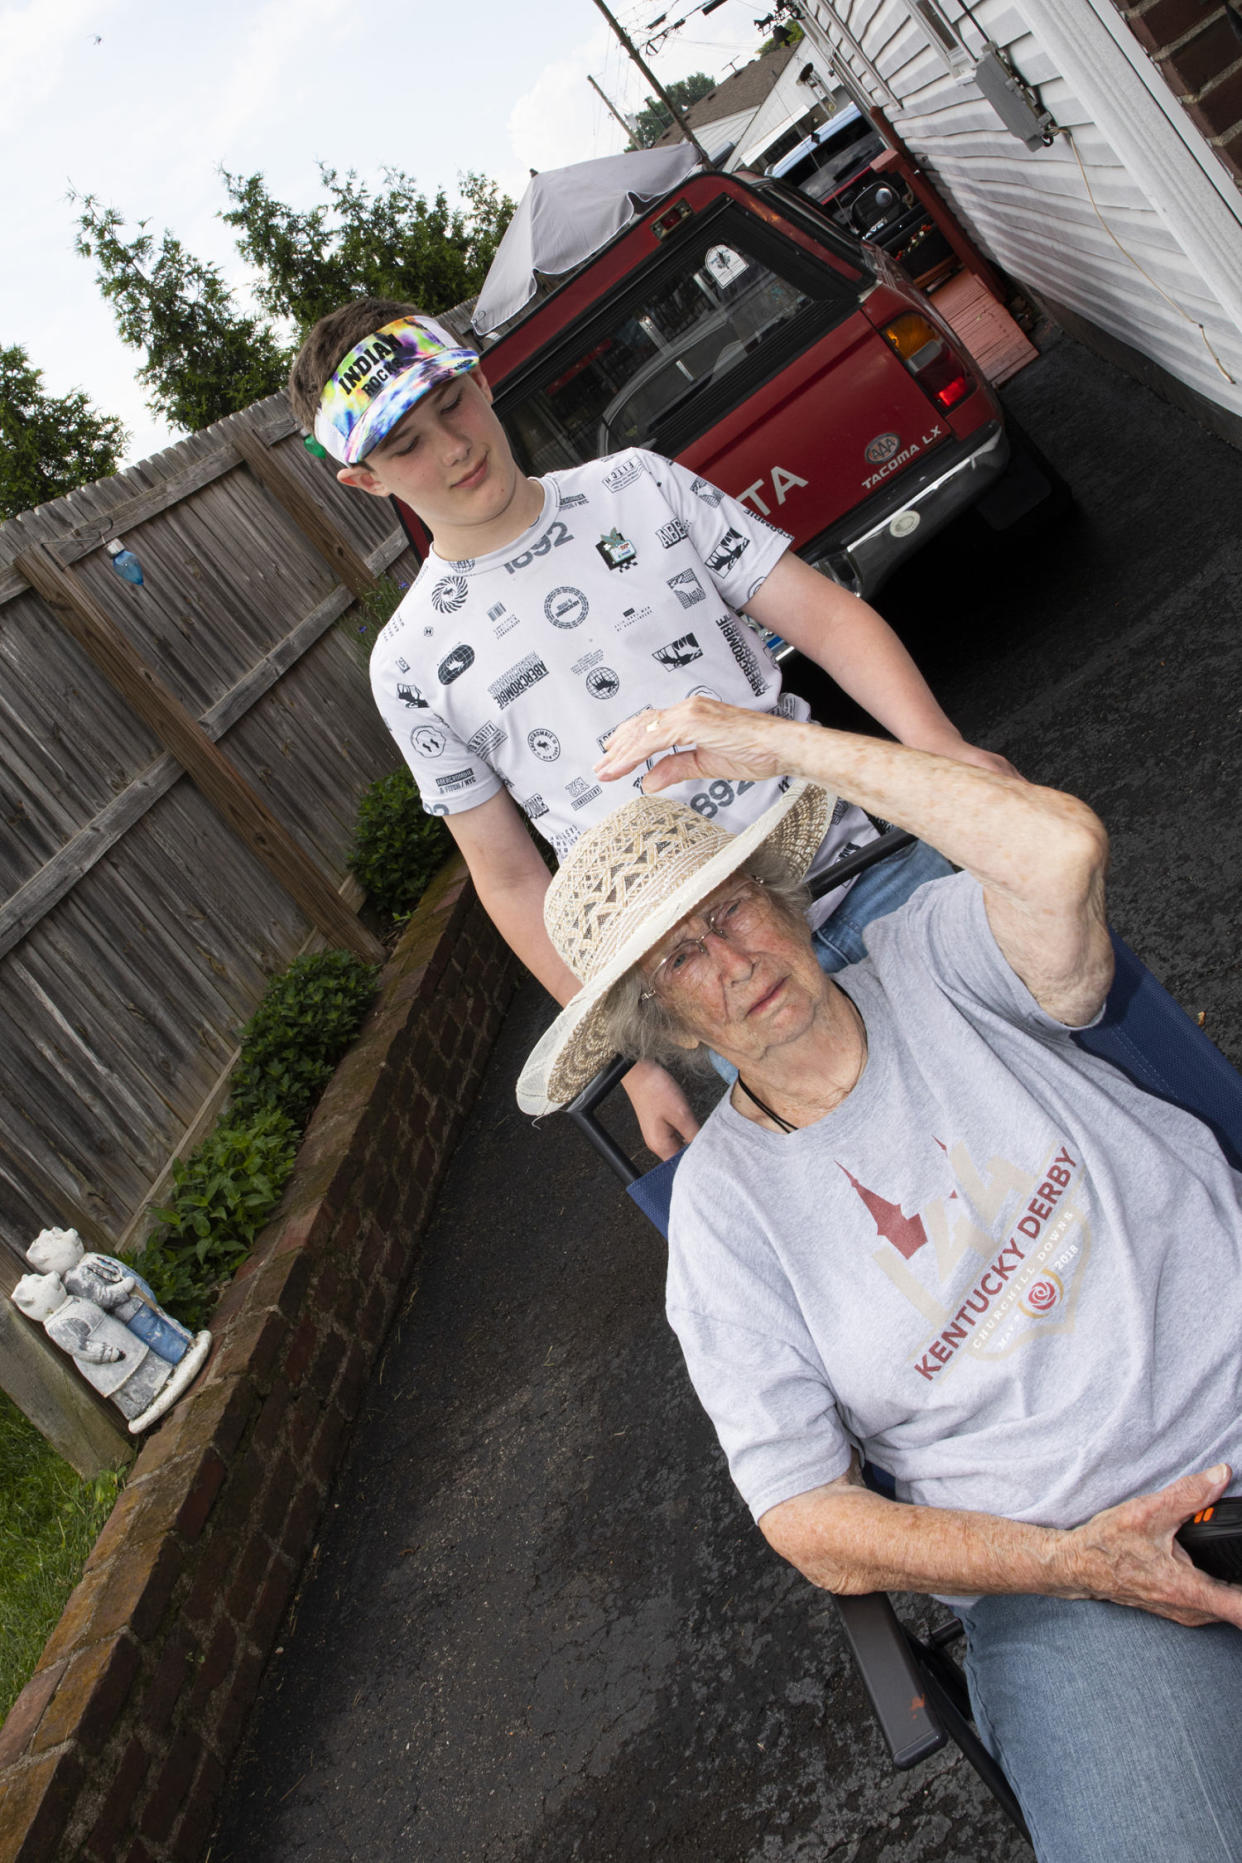 Aileen Nova Jackson, 88, and her 12-year-old grandson, Joey Jackson, can host about 15 vehicles at a time on Derby weekend. (Lili Kobielski for NBC News)